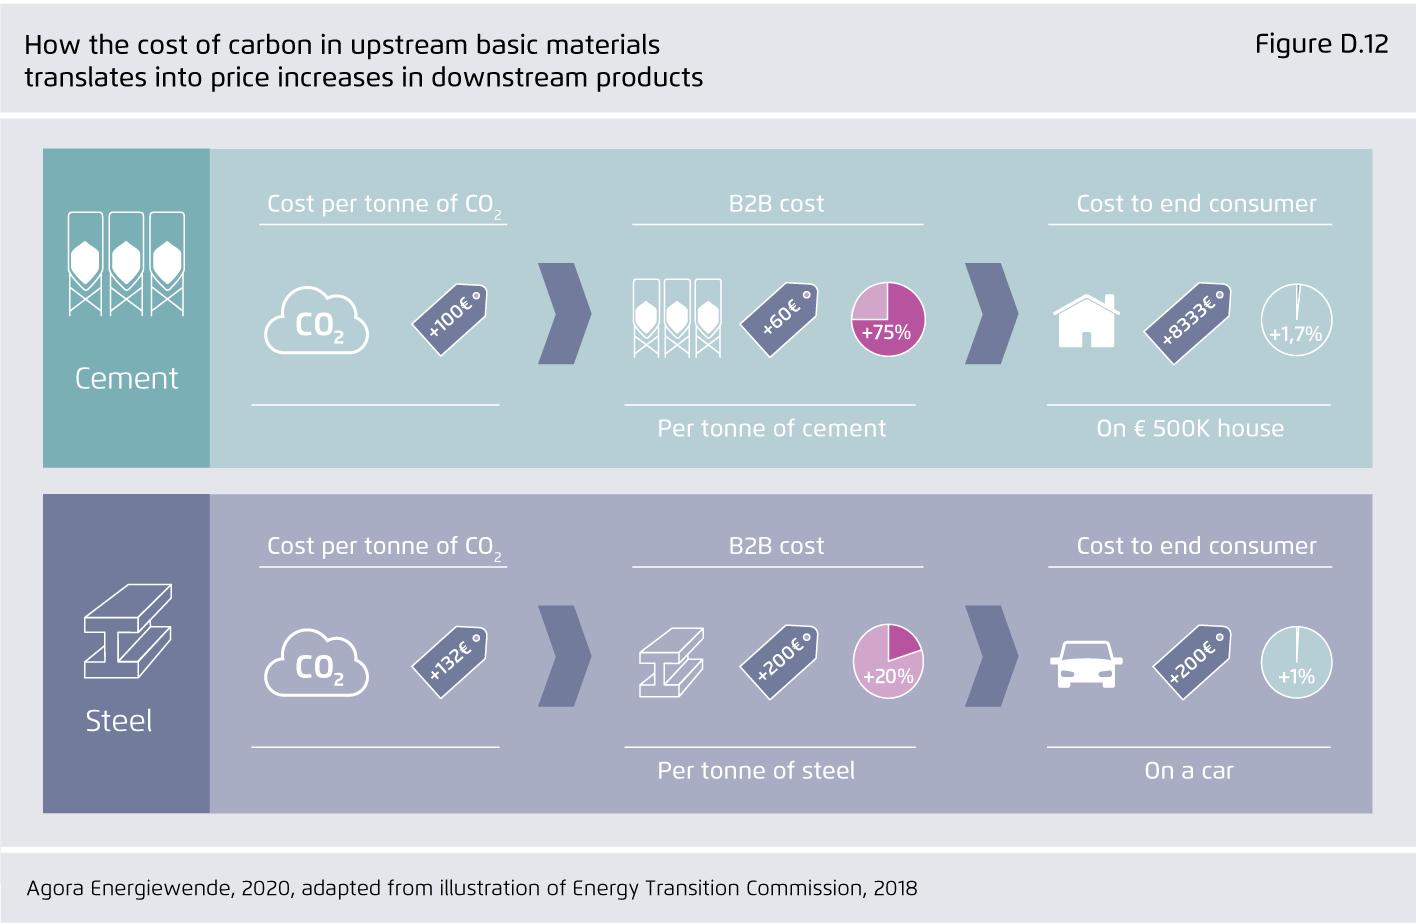 Preview for How the cost of carbon in upstream basic materials translates into price increases in downstream products